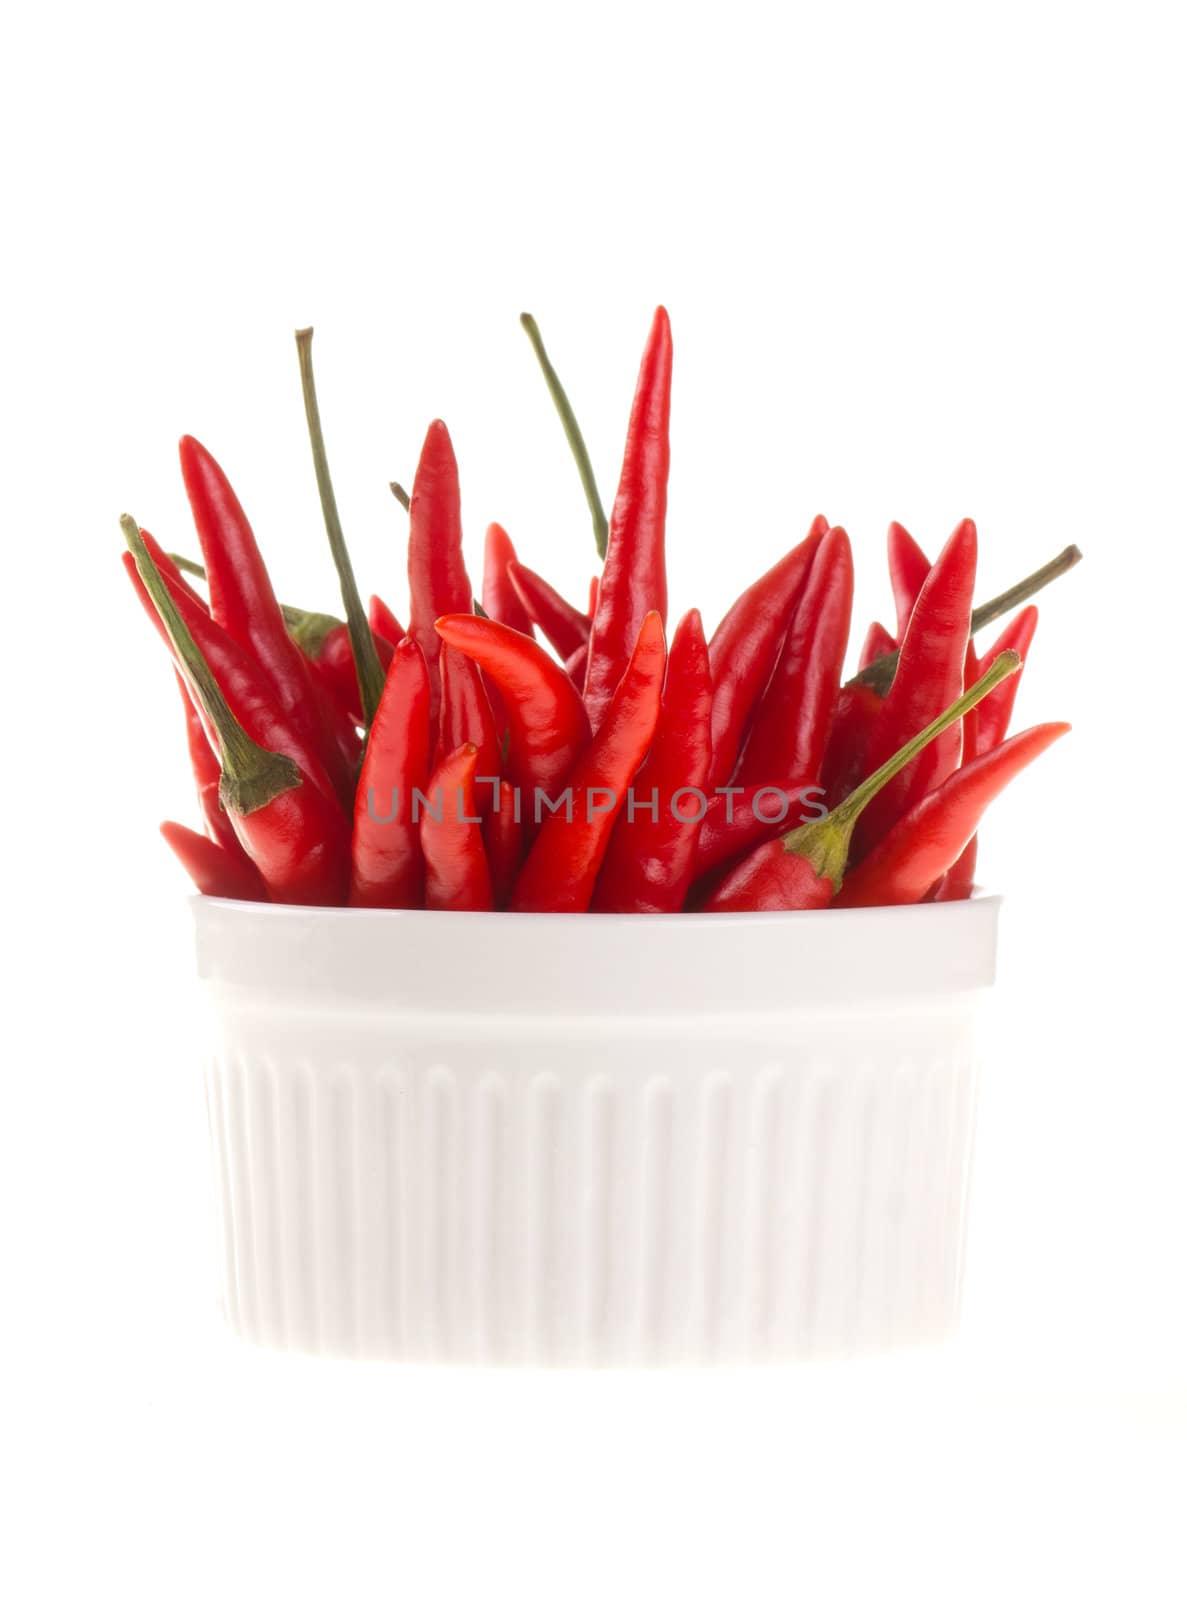 Red chili peppers in a bowl